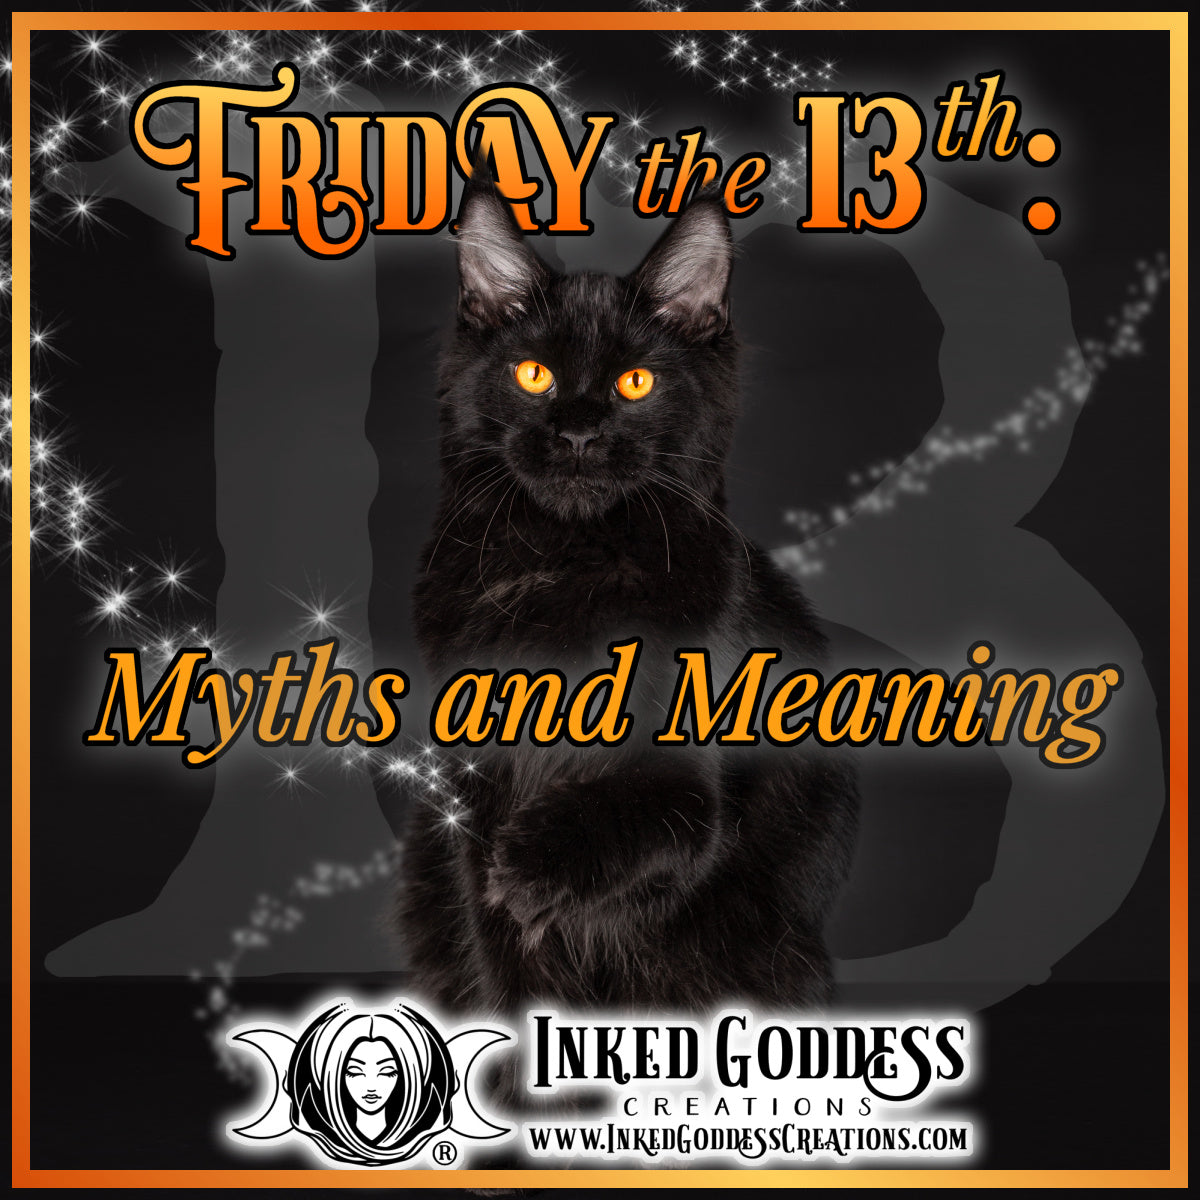 Friday the 13th: Myths and Meaning